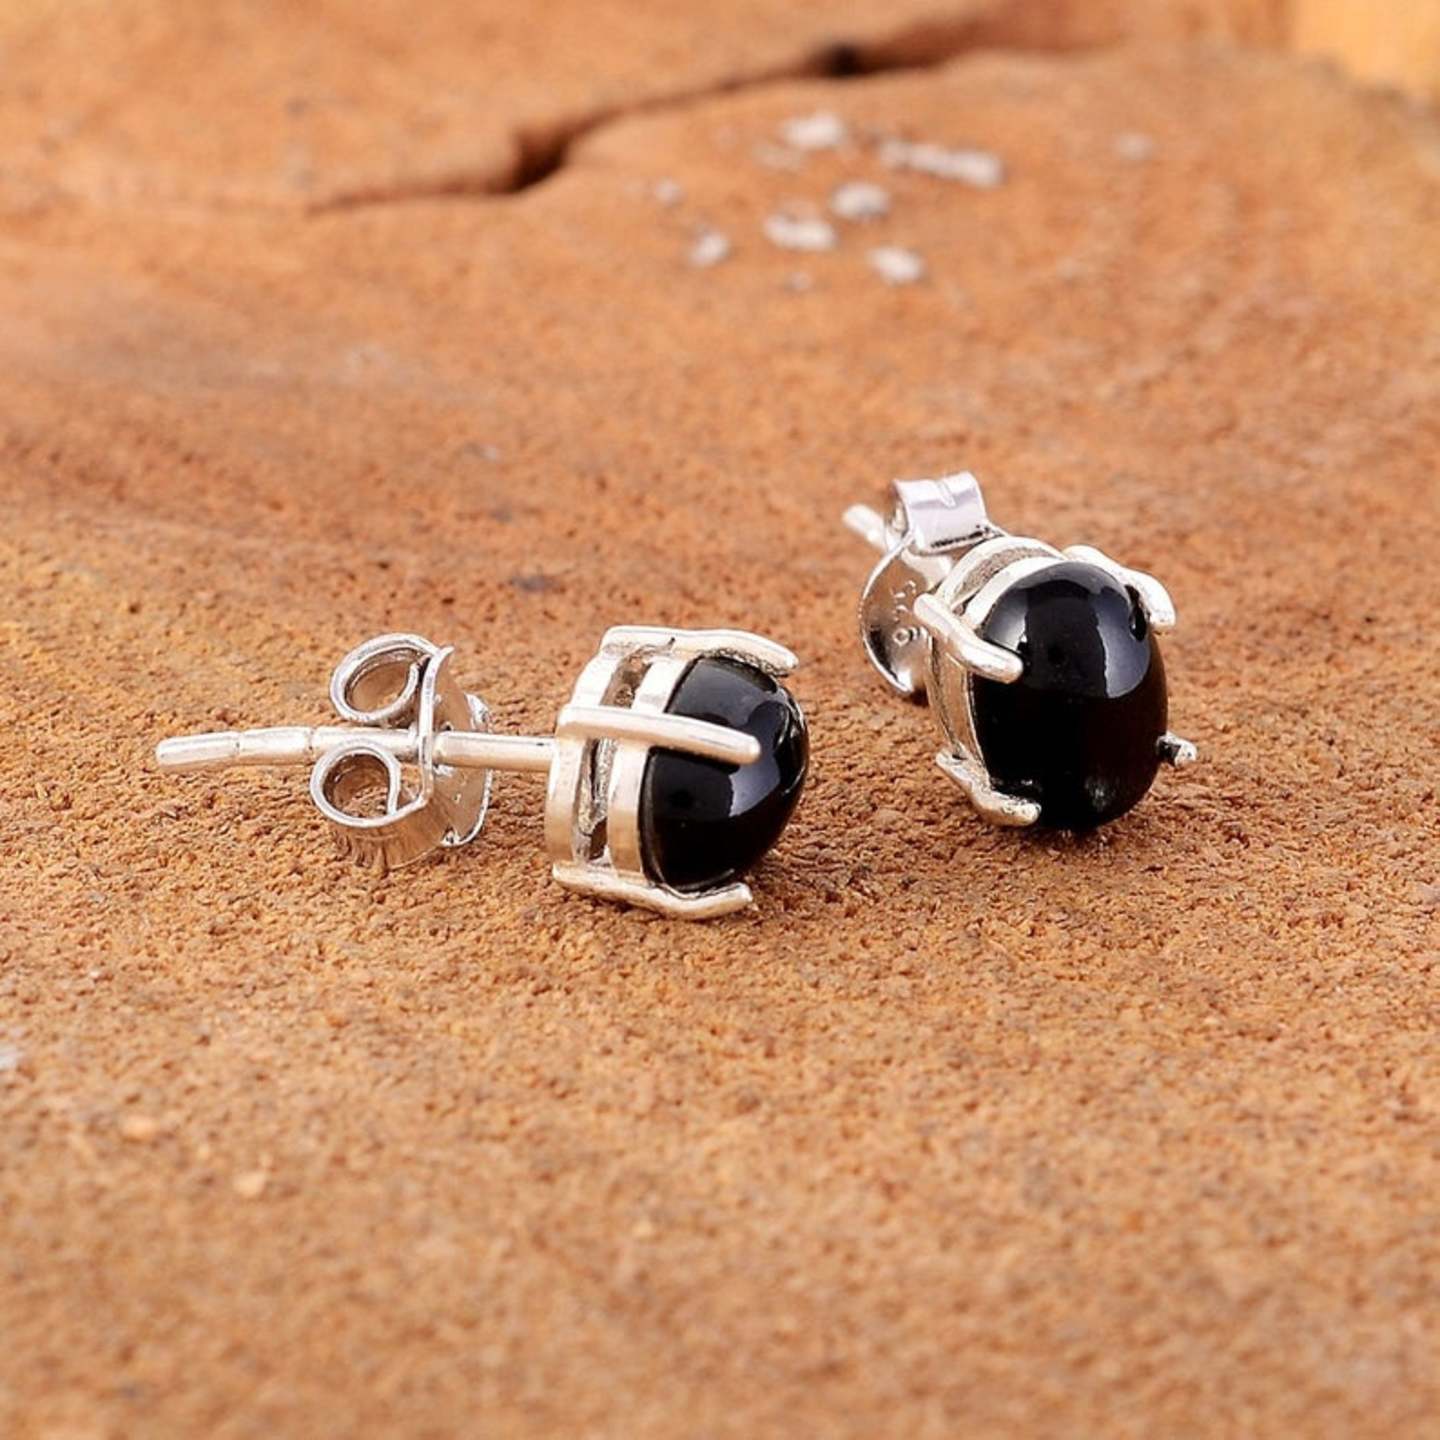 Natural Black Star Stud Earring - 925 Solid Sterling Silver - 5x7 MM Oval Cab Stud Earring - Gemstone Stud Earring - Silver Stud Earring